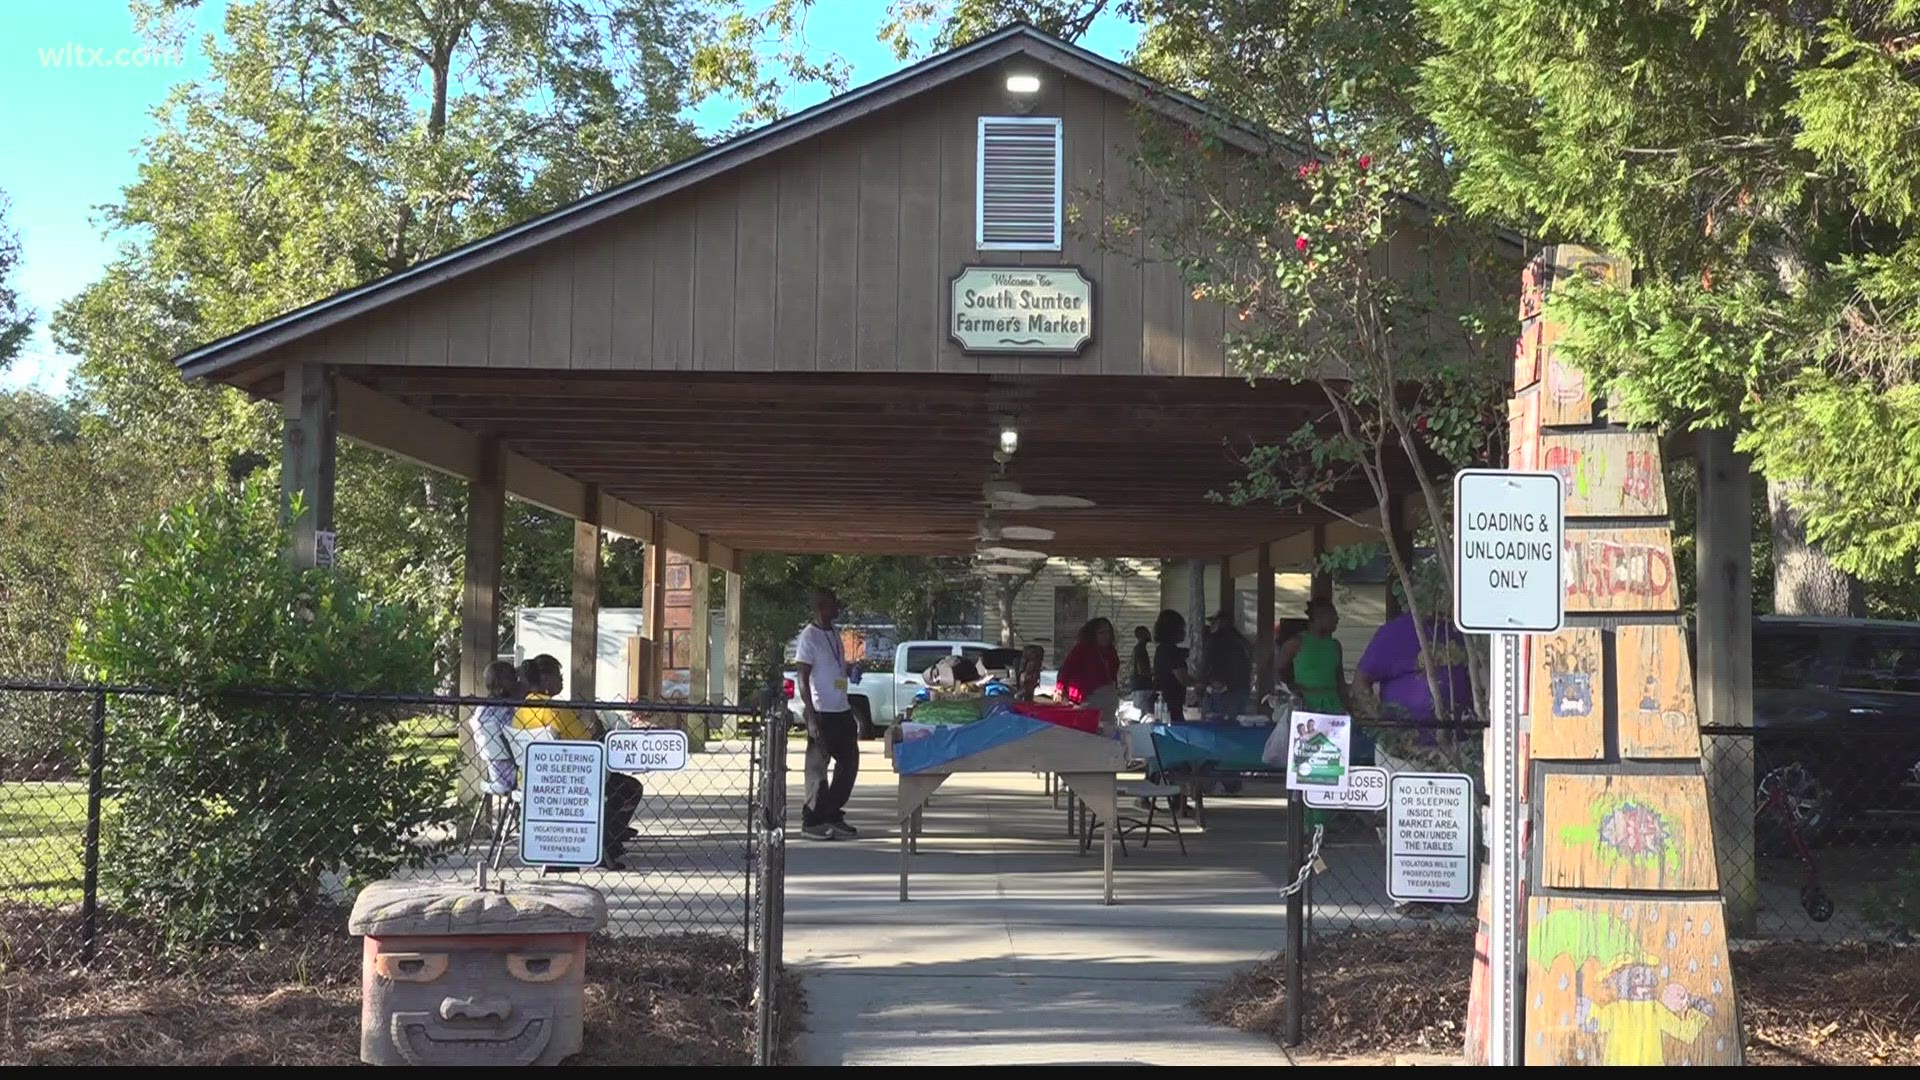 The market has been expanding to serve the community with more vendors.